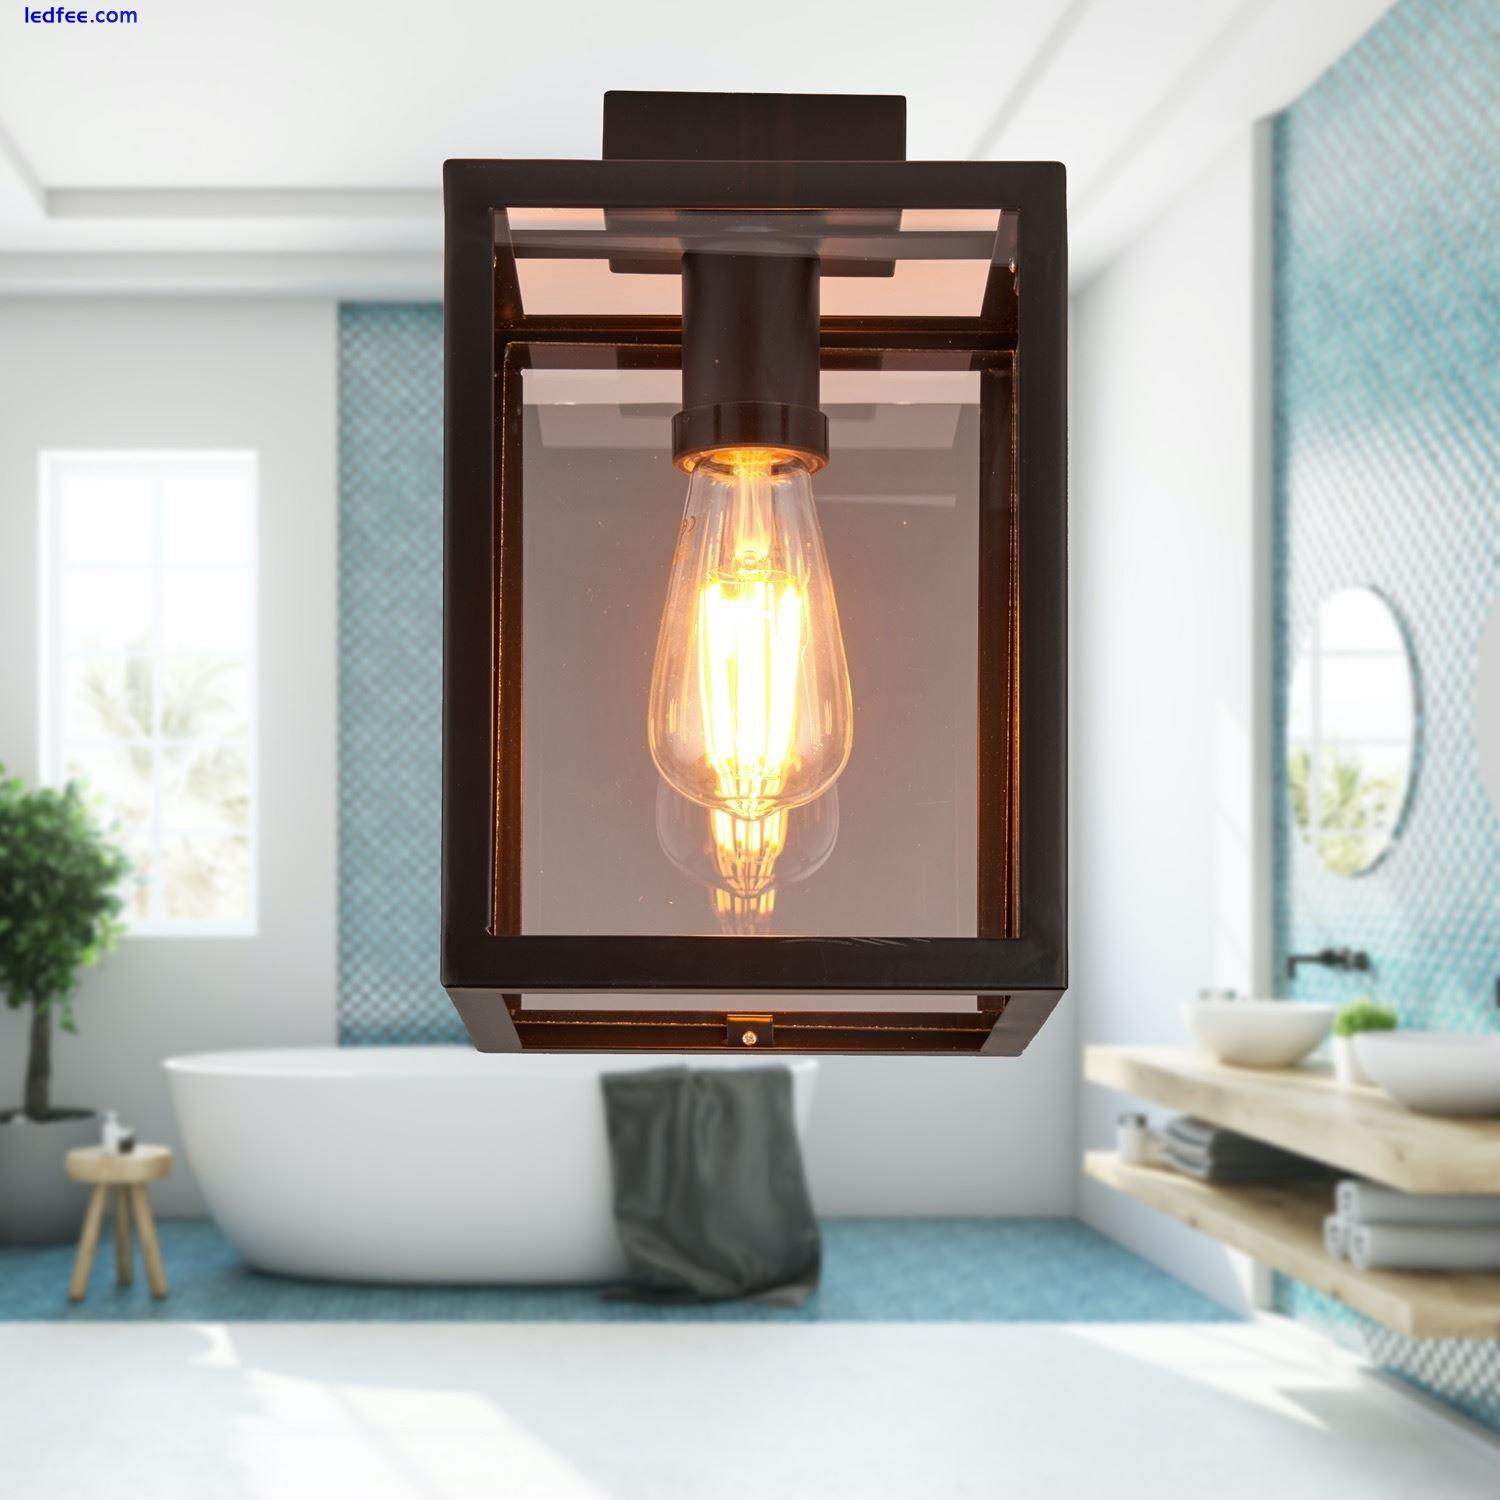 Modern Black Ceiling Flush Light Fitting IP44 Rated Bathroom Outdoor Porch 3 